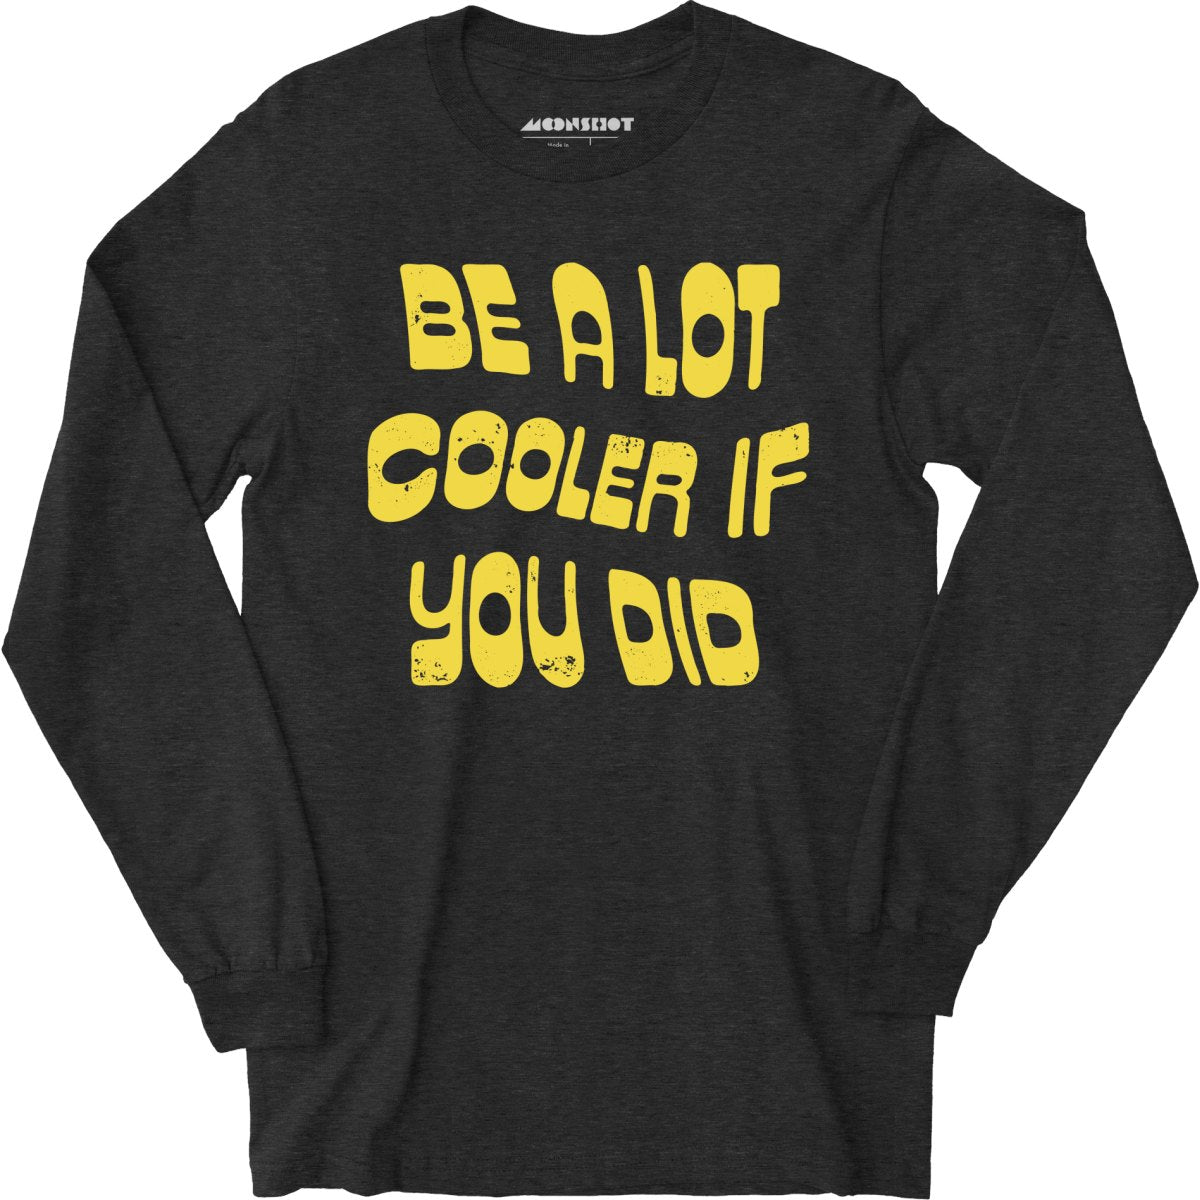 Be a Lot Cooler if You Did - Long Sleeve T-Shirt